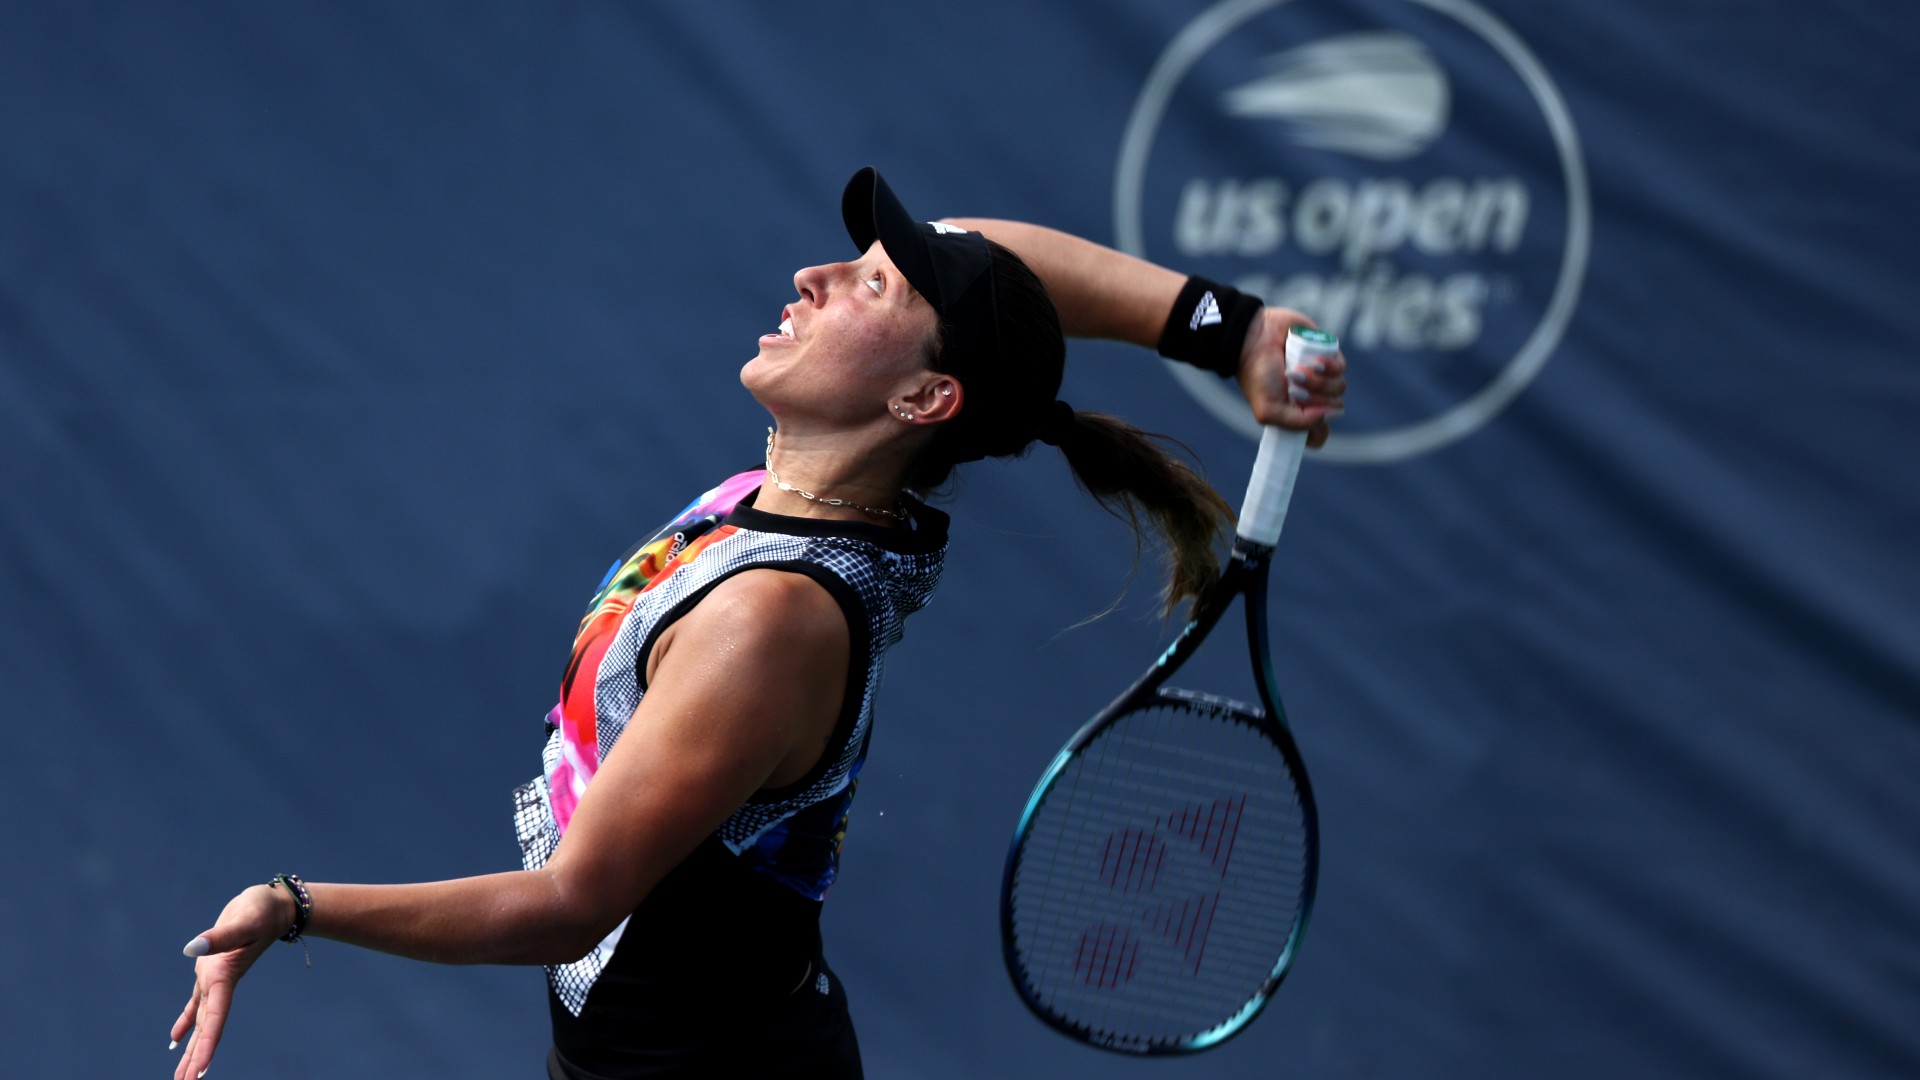 WTA Citi Open Tennis Odds, Picks and Predictions: Pegula Will Comfortably Beat Saville (Wednesday, Aug. 3) article feature image